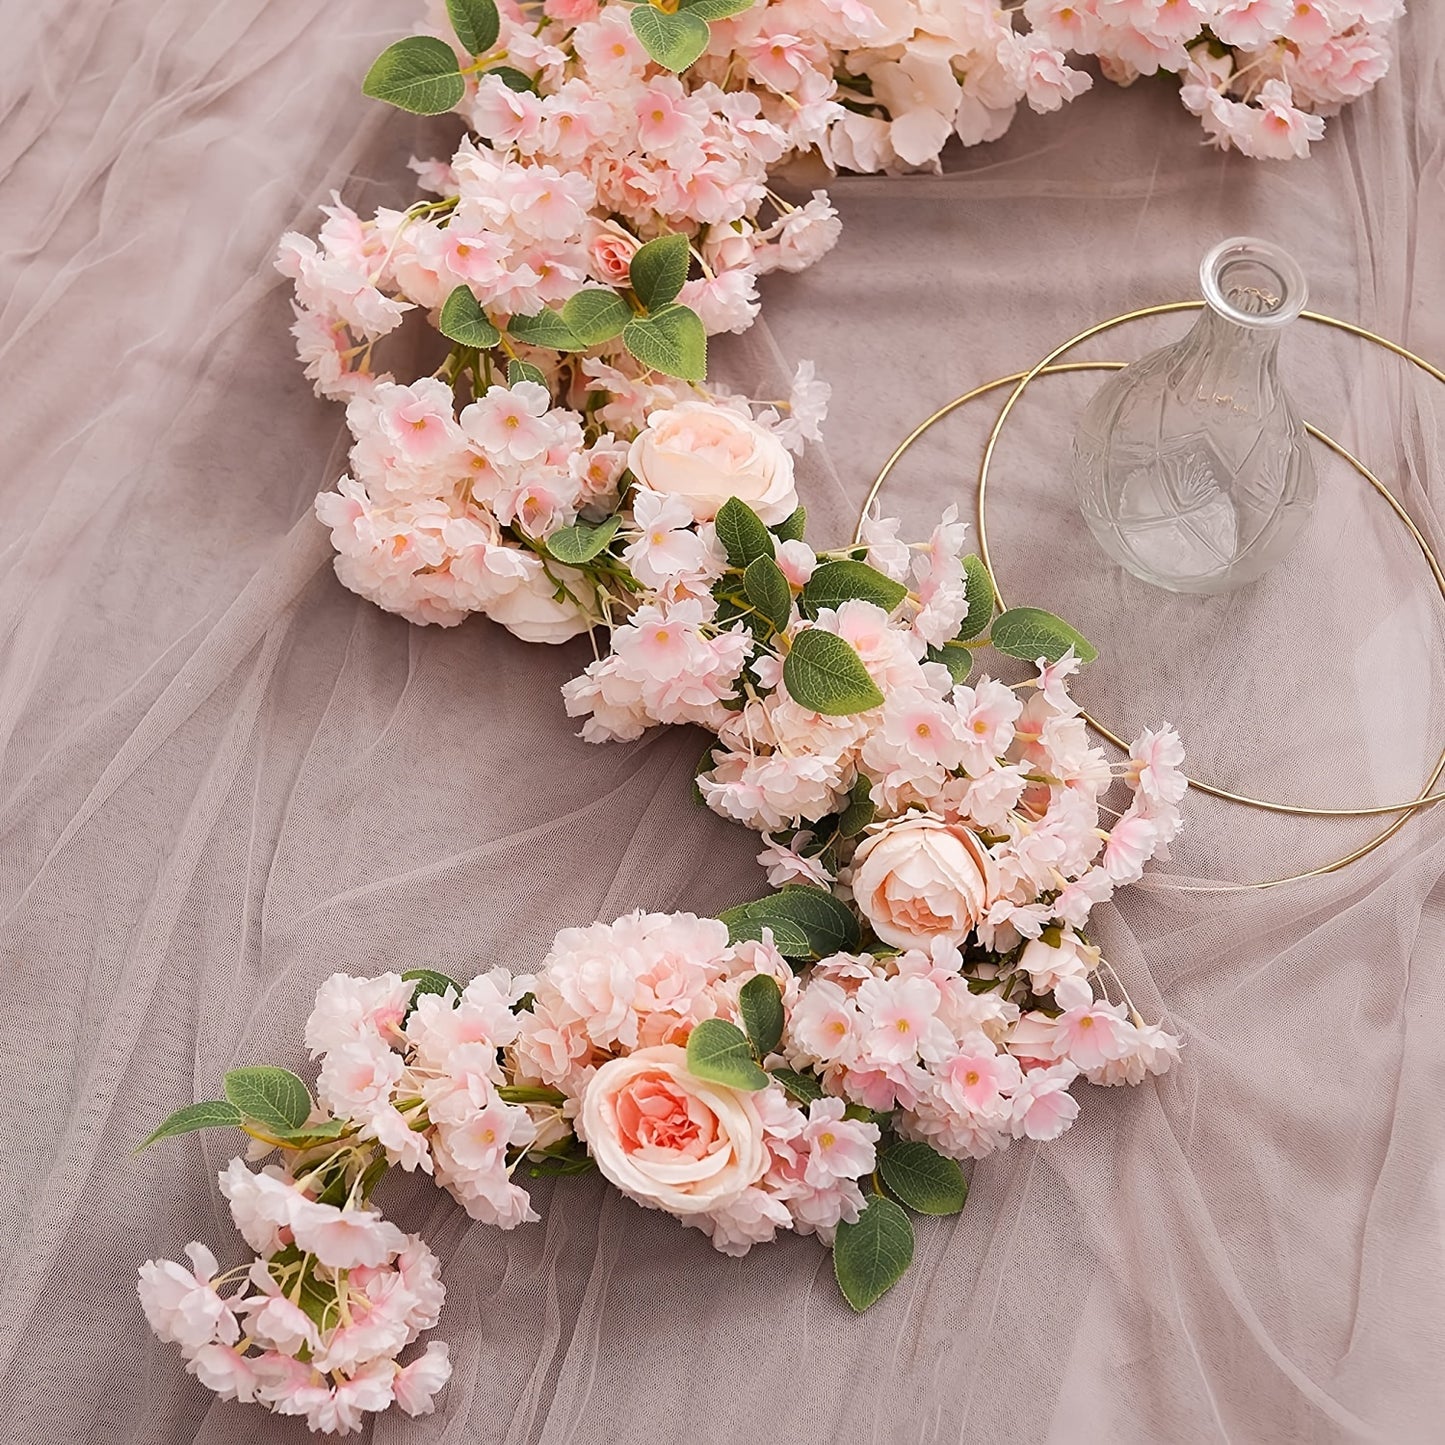 1pc 72.83in Artificial Hanging Flowers, Decorative Artificial Flowers Garland